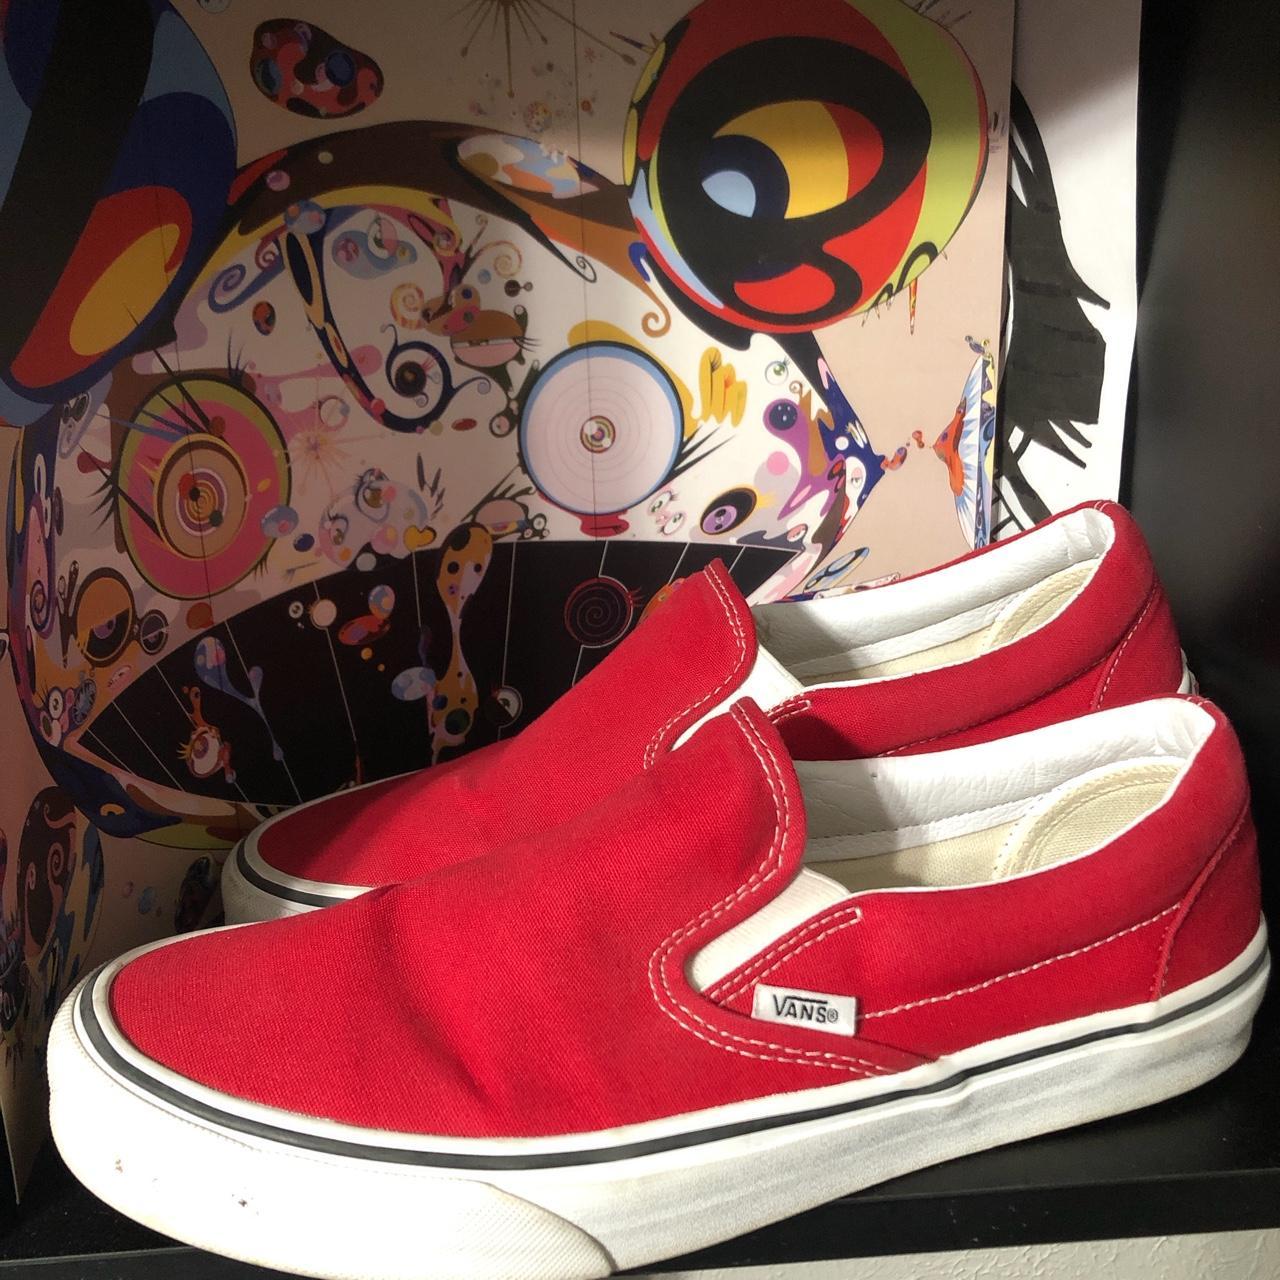 Vans Men's Red and White Trainers (2)